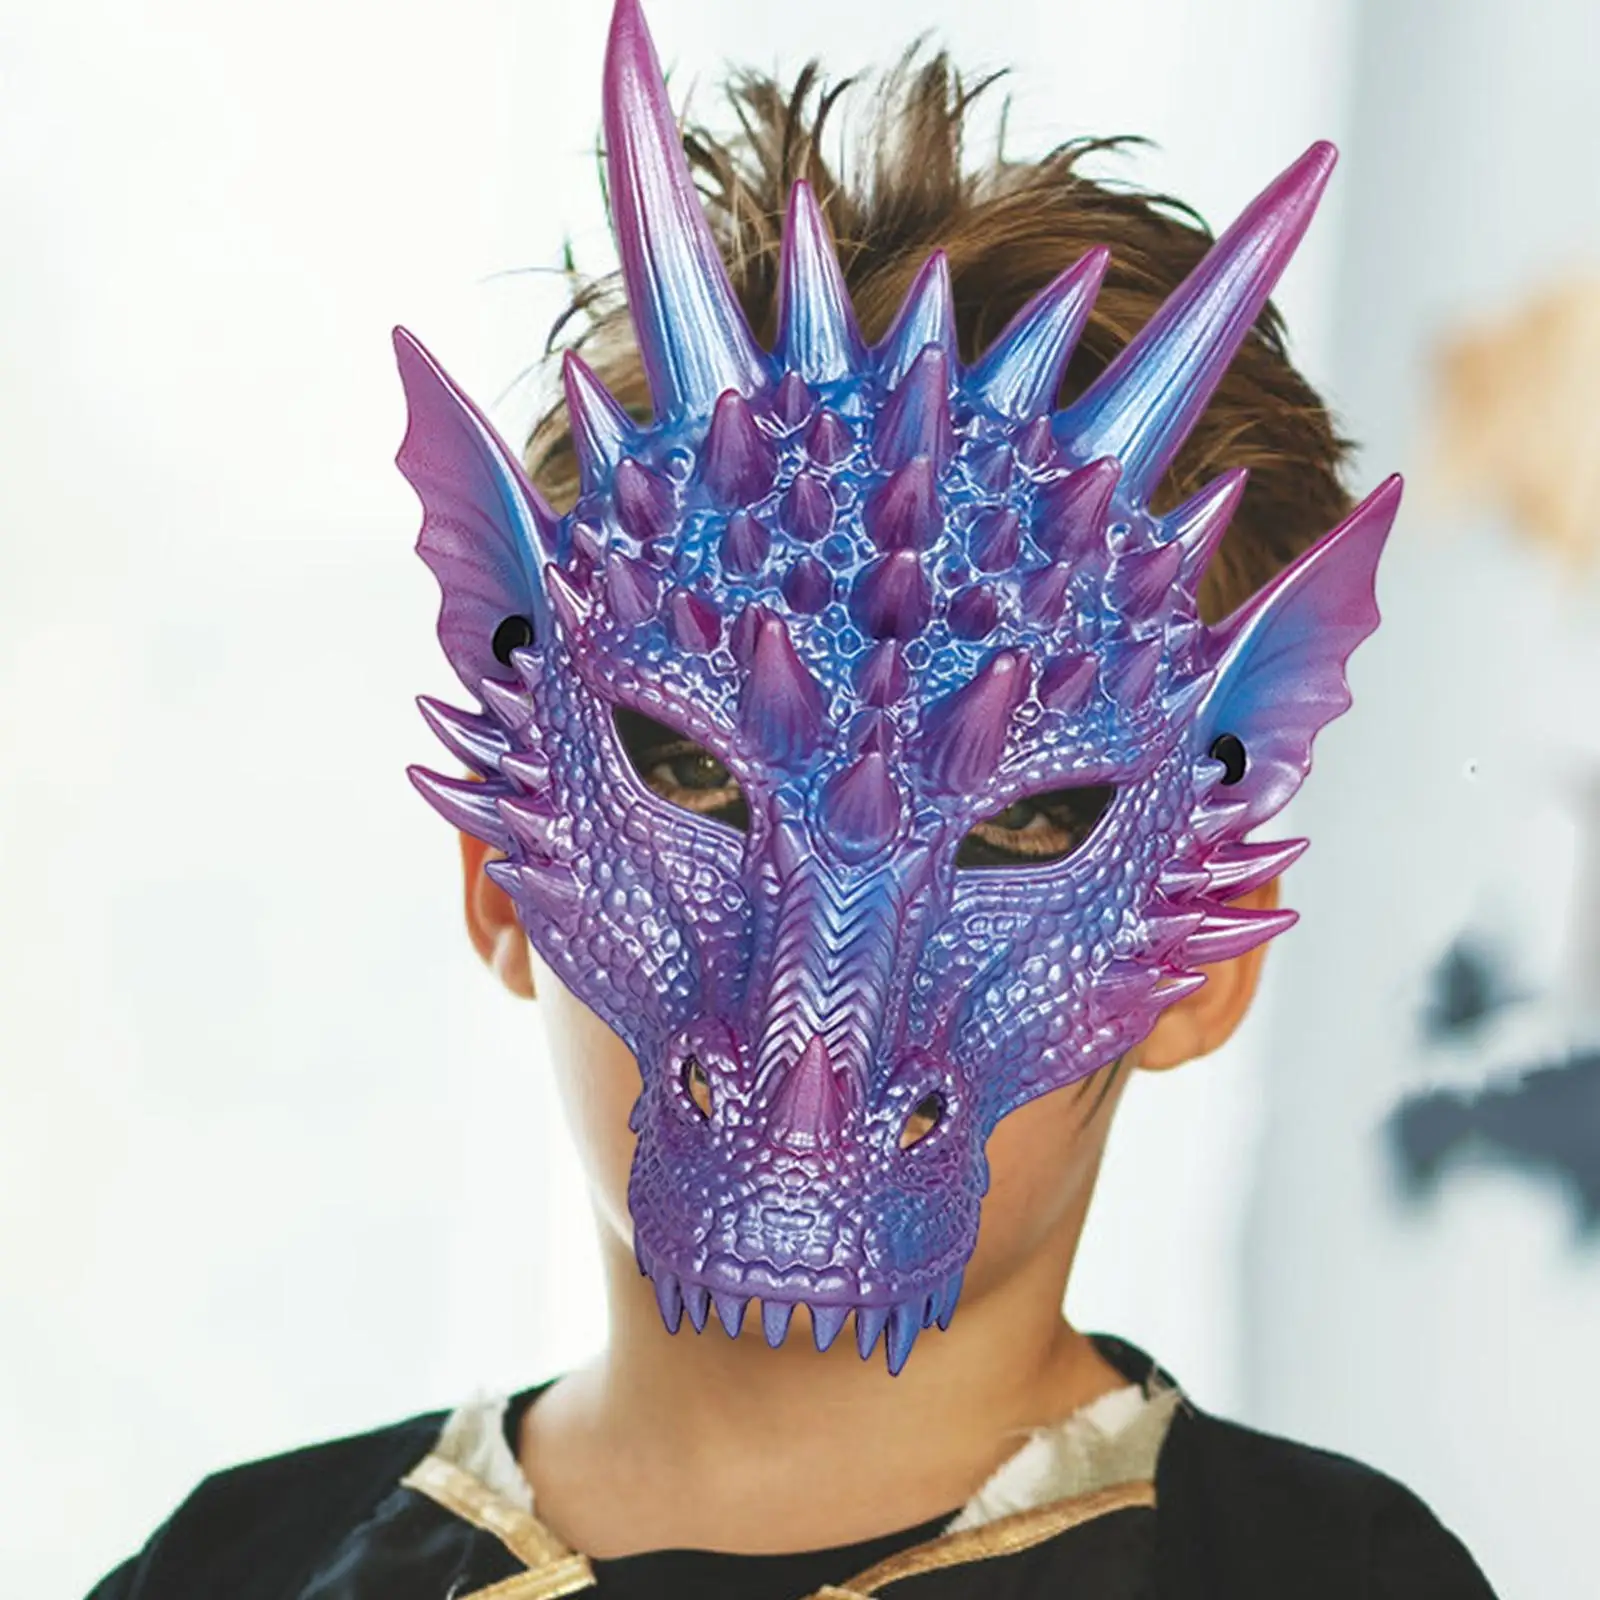 Dragon Mask, Halloween Masquerade Mask, Fantasy Realistic Full Head Cover Costume Mask for Halloween